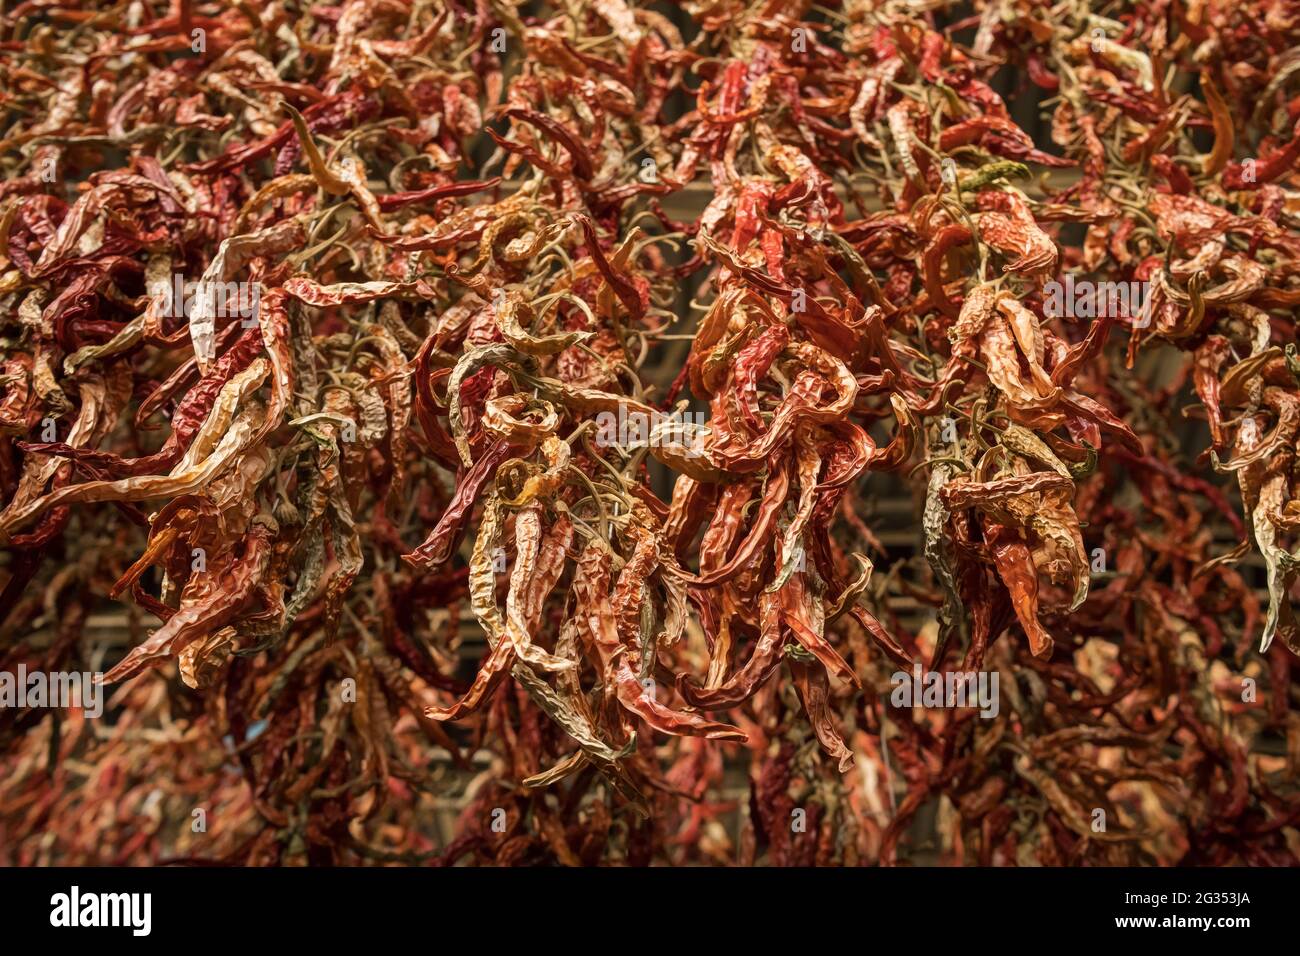 Dried chili pepper hanging on the market in Turkey Stock Photo